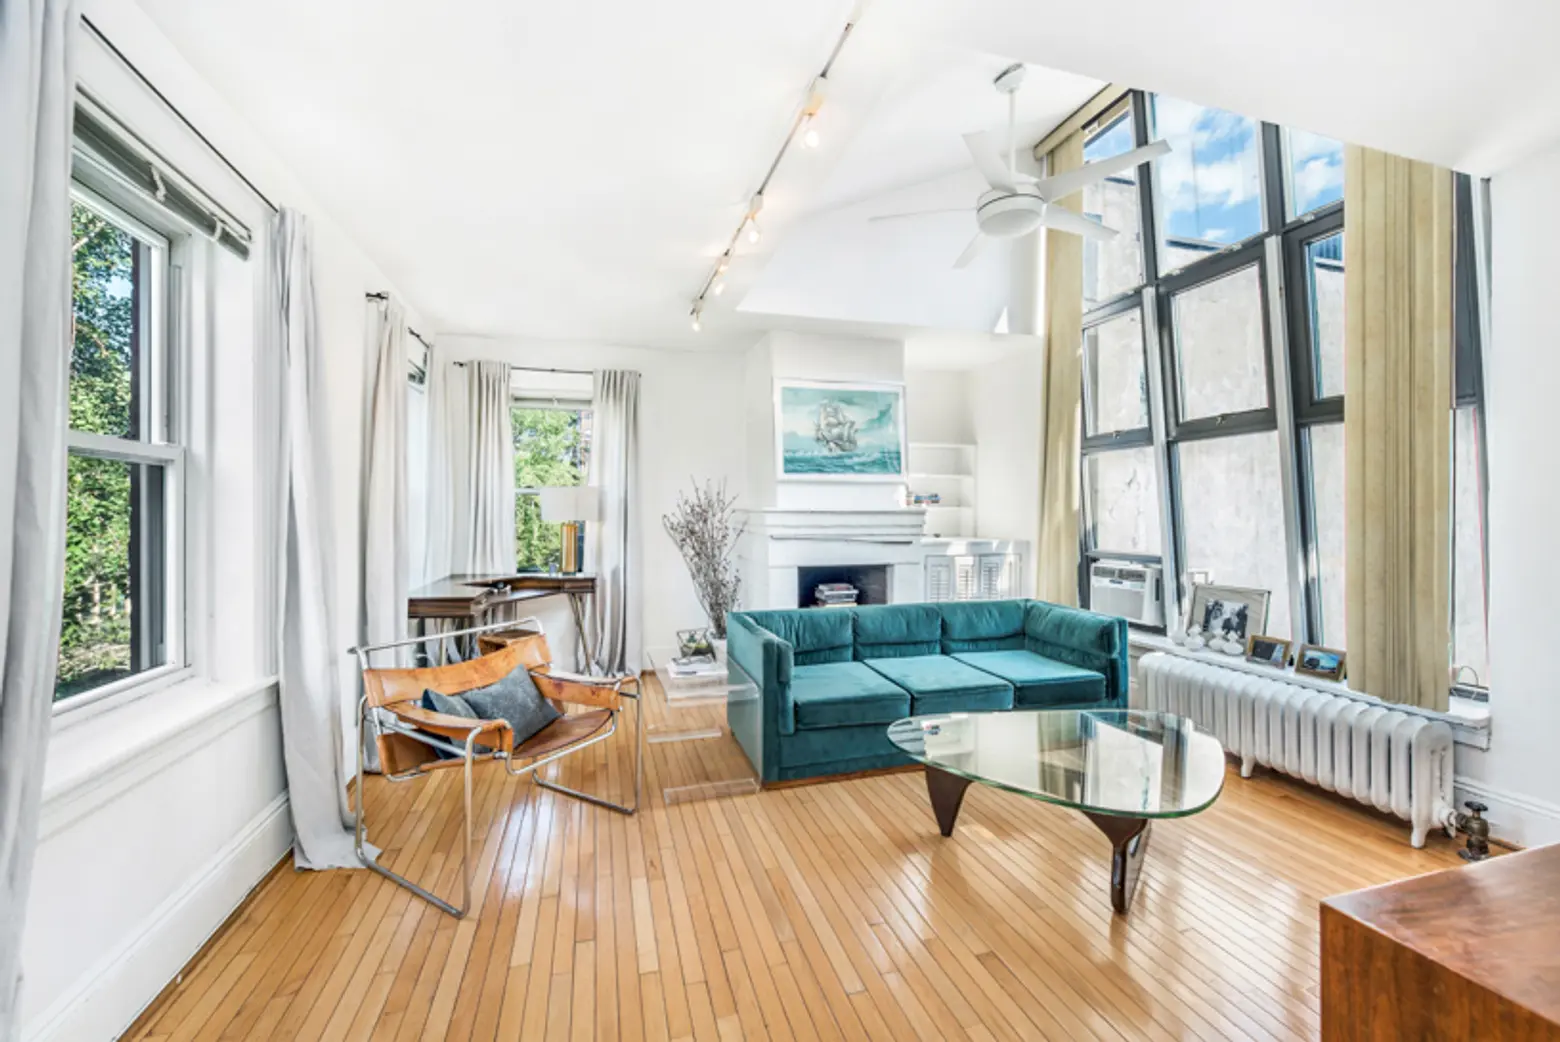 Flexible Floor Plan at This Bright Greenwich Village Apartment, Asking $4,500/Month